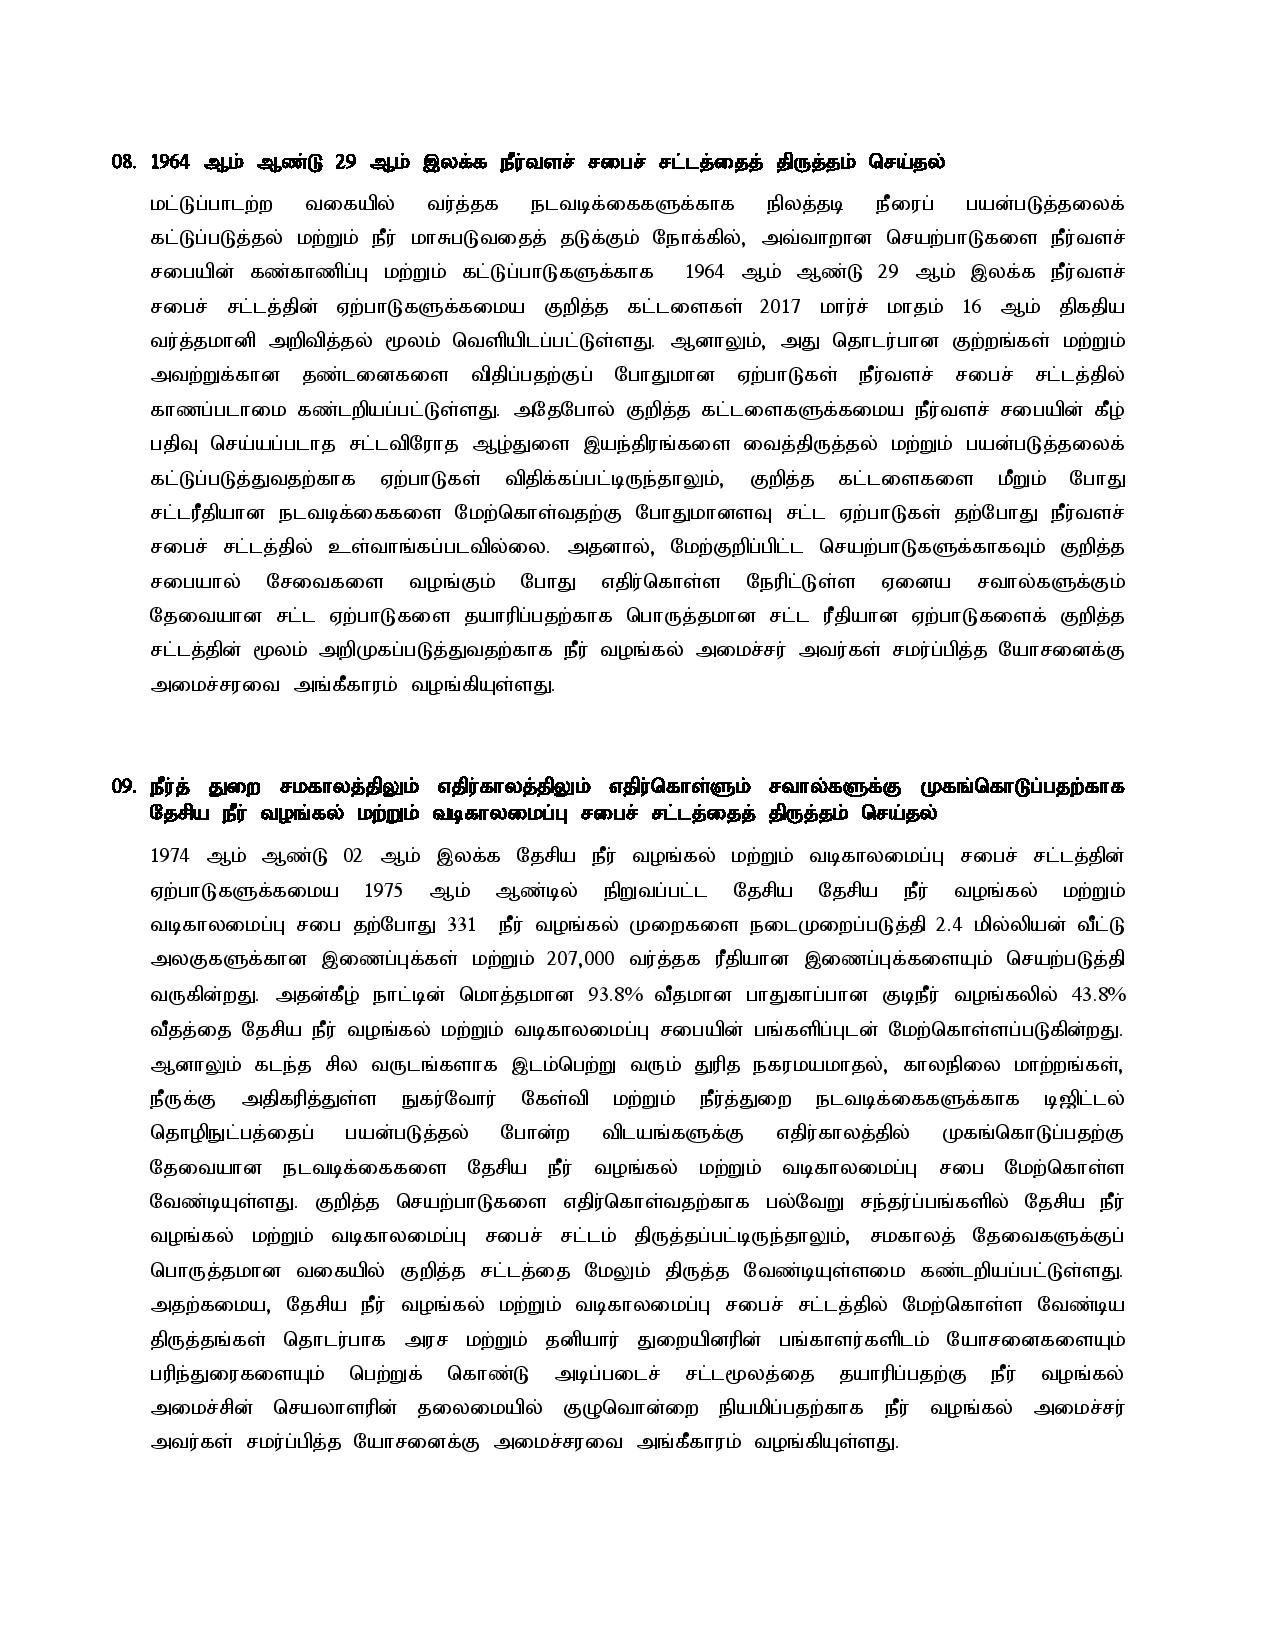 Cabinet Decision on 12.07.2021 Tamil page 004